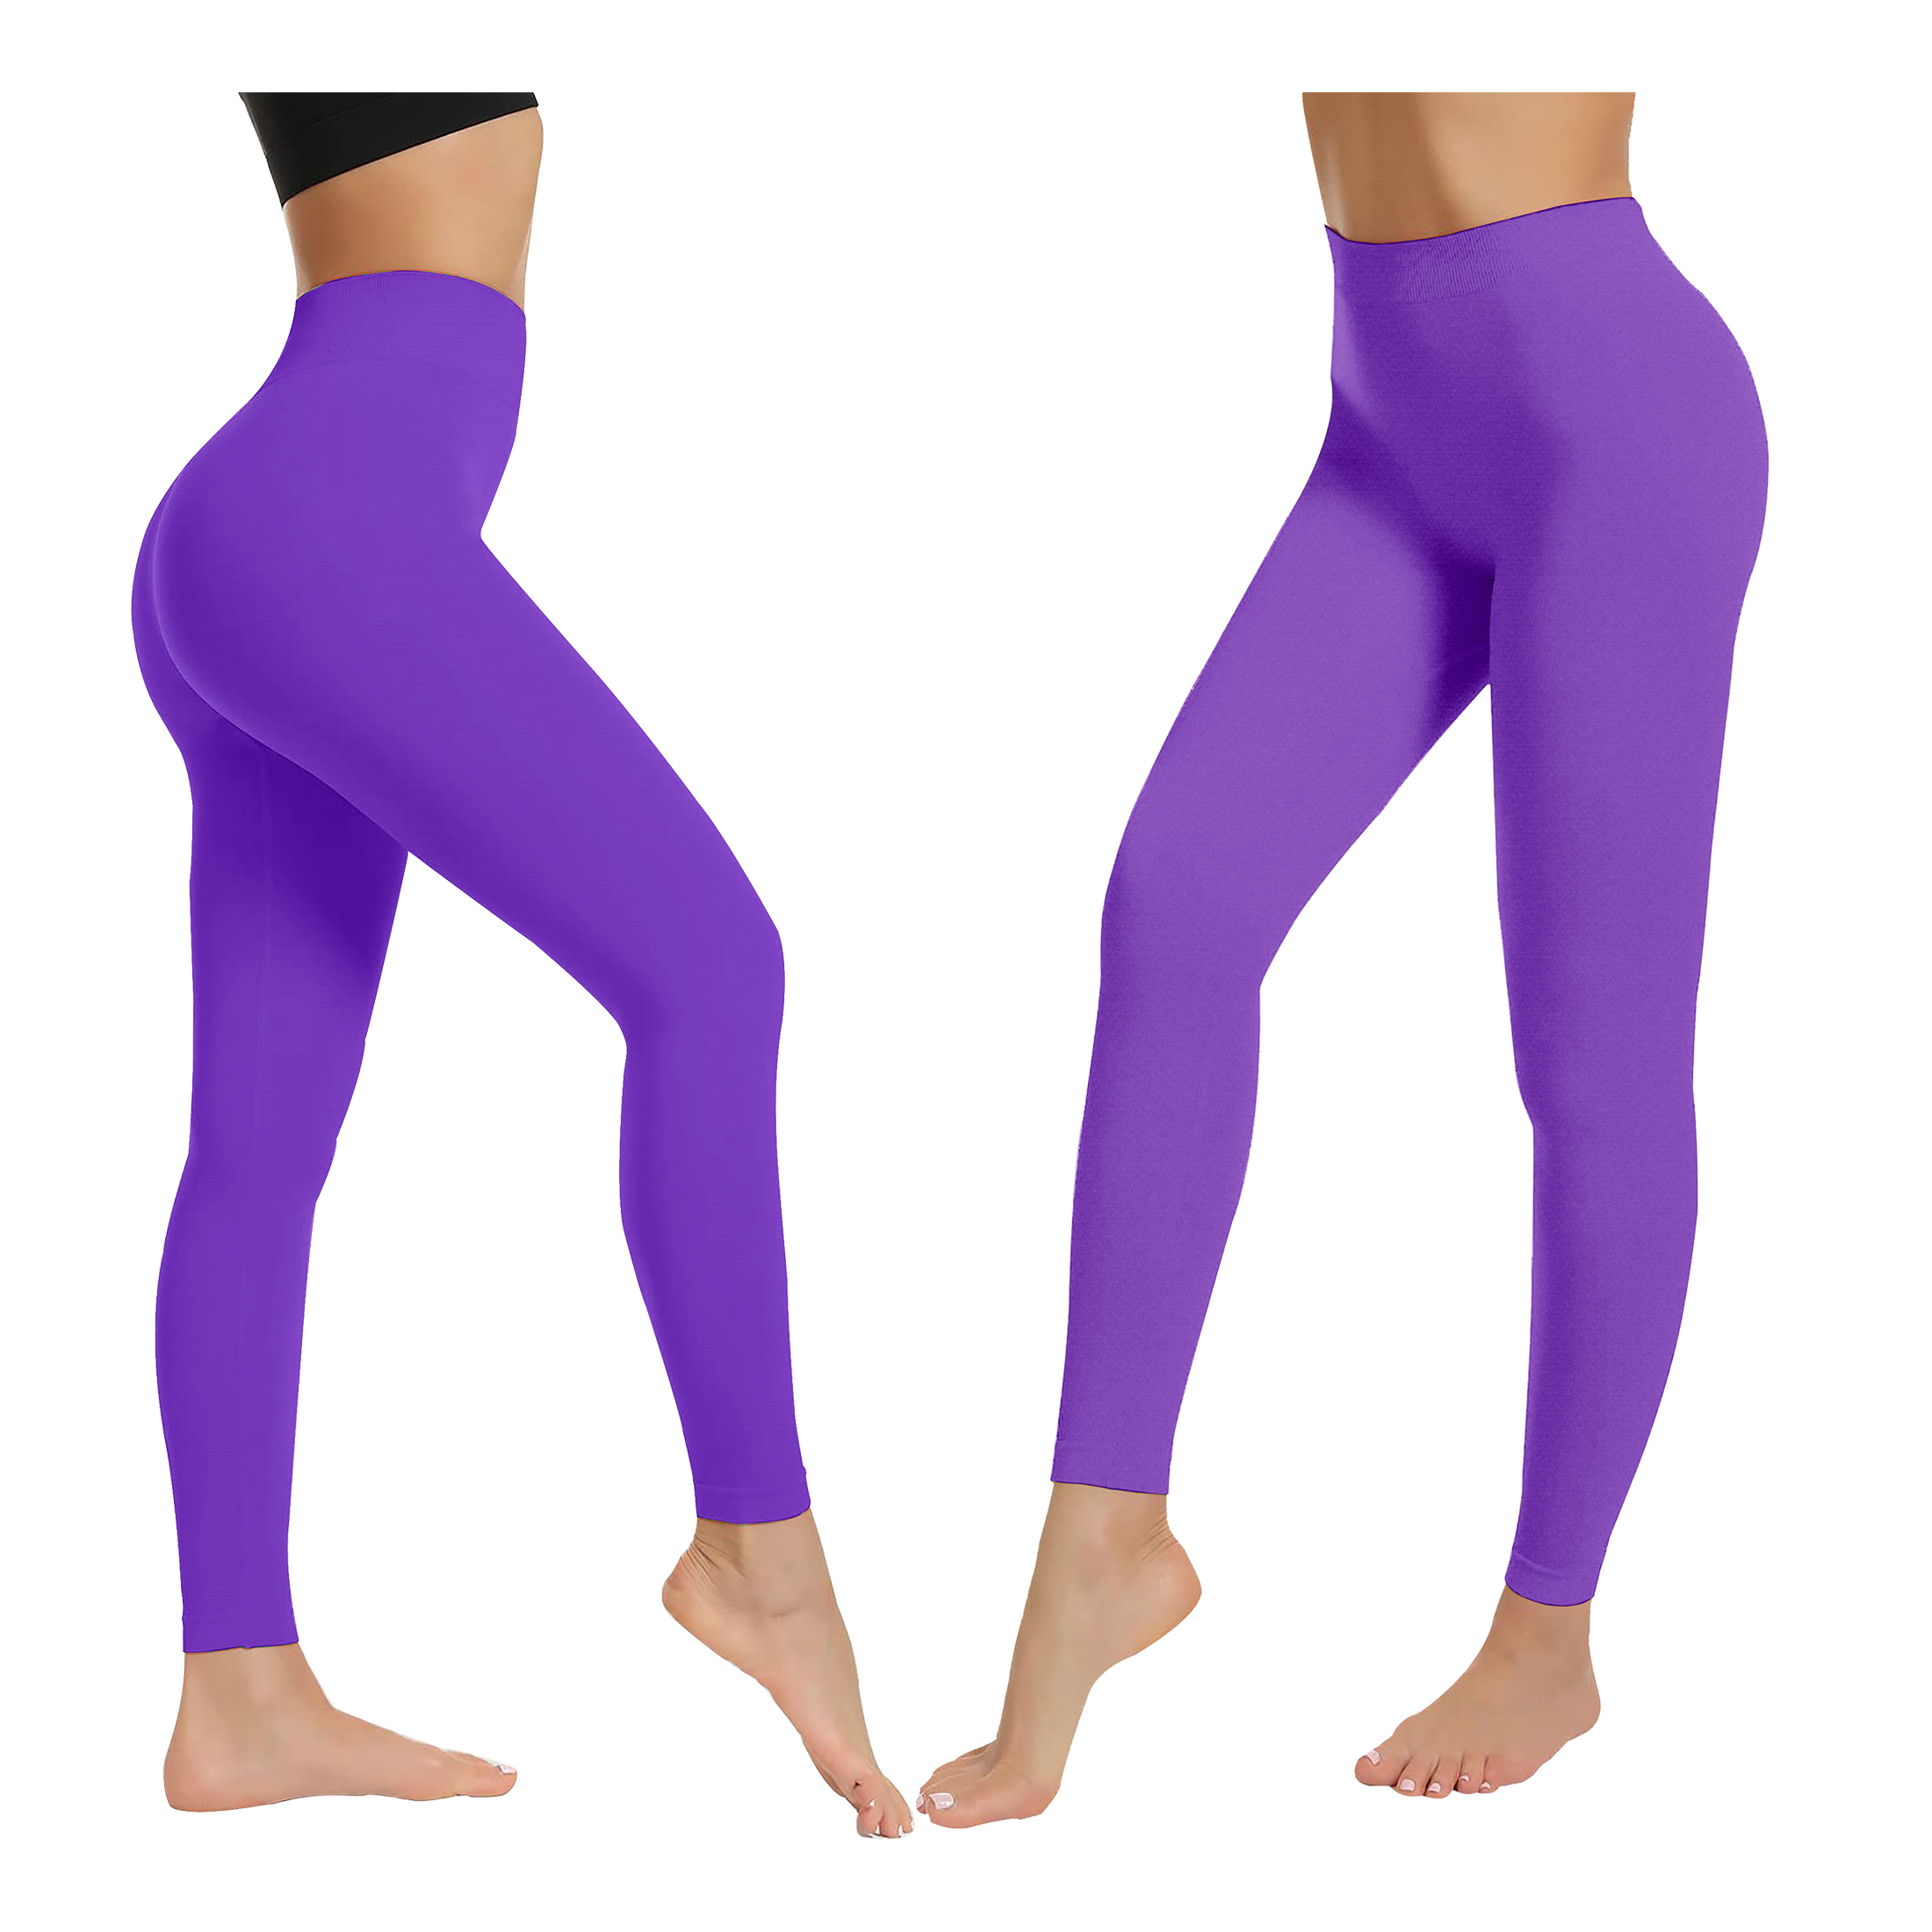 2-Pack: Women's High-Waist Ultra-Soft Stretchy Solid Fitness Yoga Leggings Pants - XL